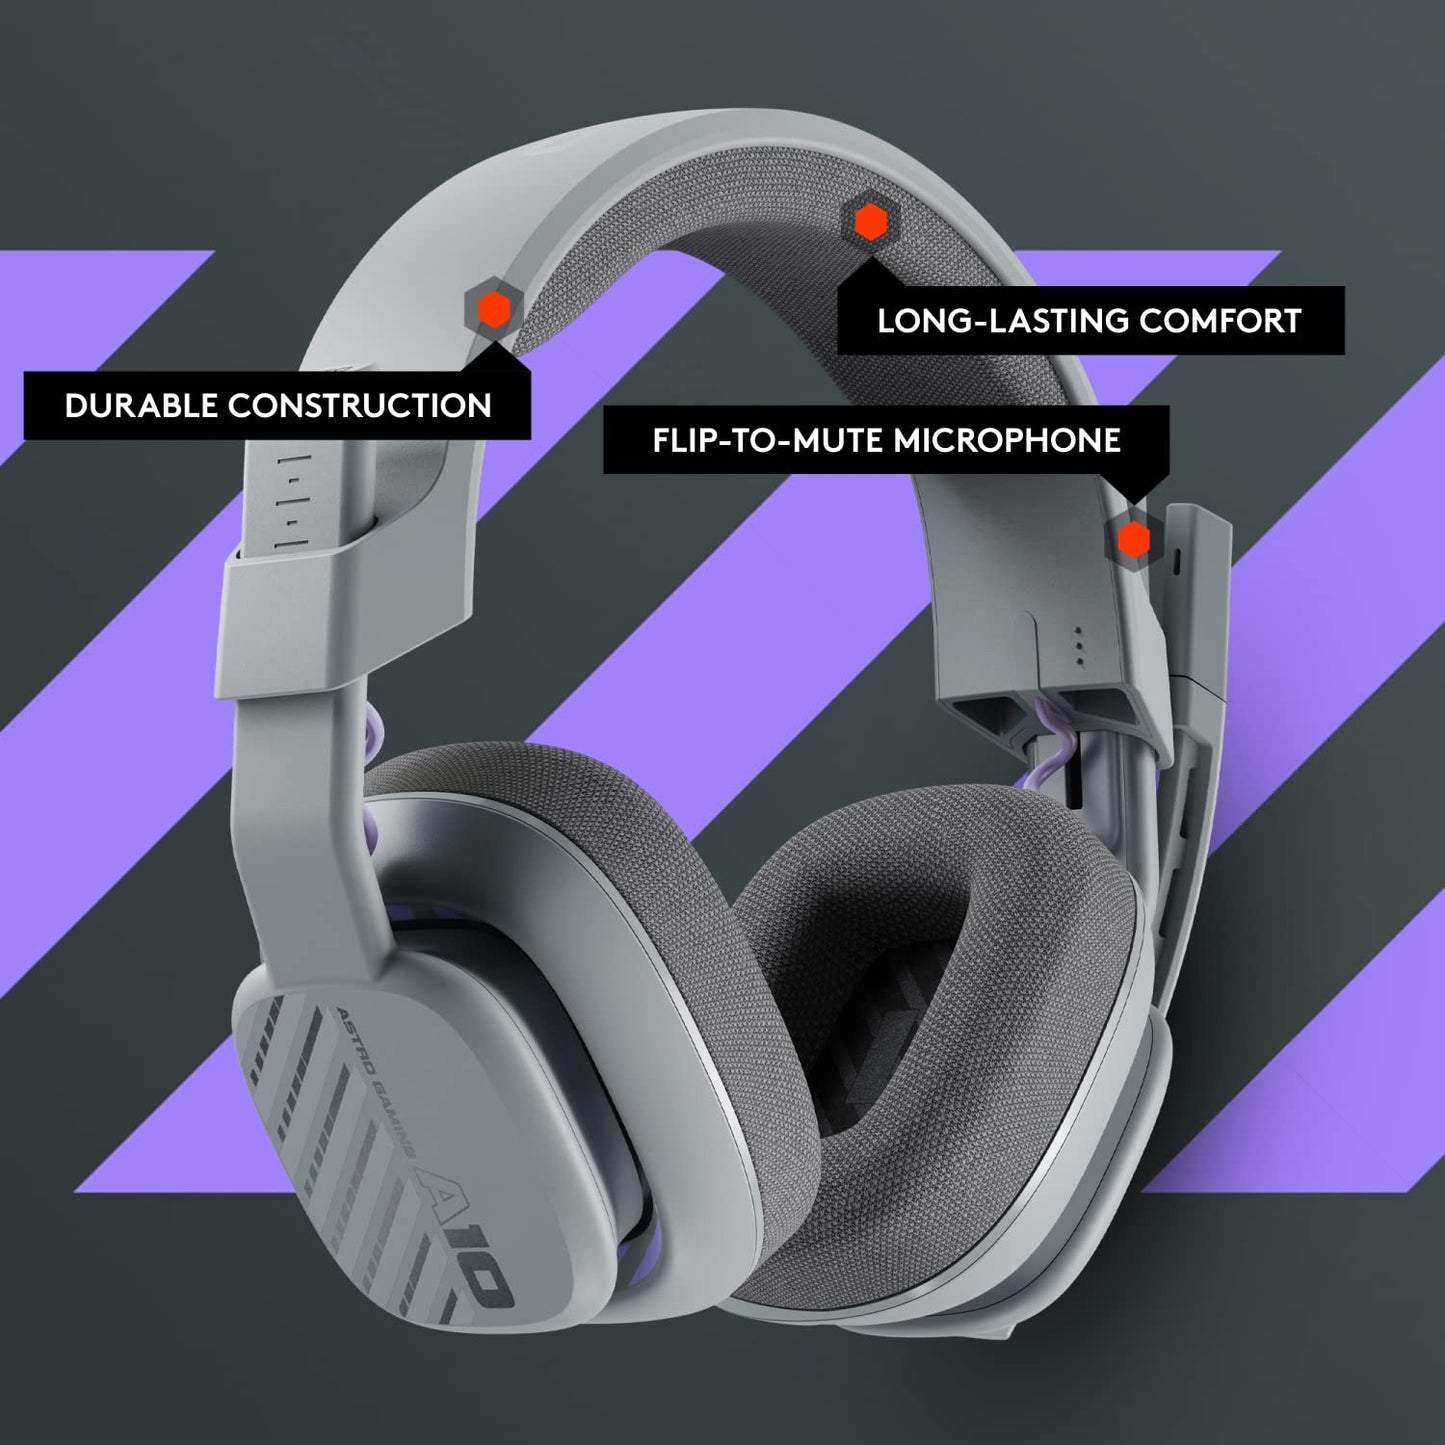 Astro A10 Gaming Headset Gen 2 Wired - Over-Ear Headphones with flip-to-Mute Microphone, 32 mm Drivers, for Xbox Series X|S, One, Playstation 5/4, Nintendo Switch, PC, Mac Grey - amzGamess